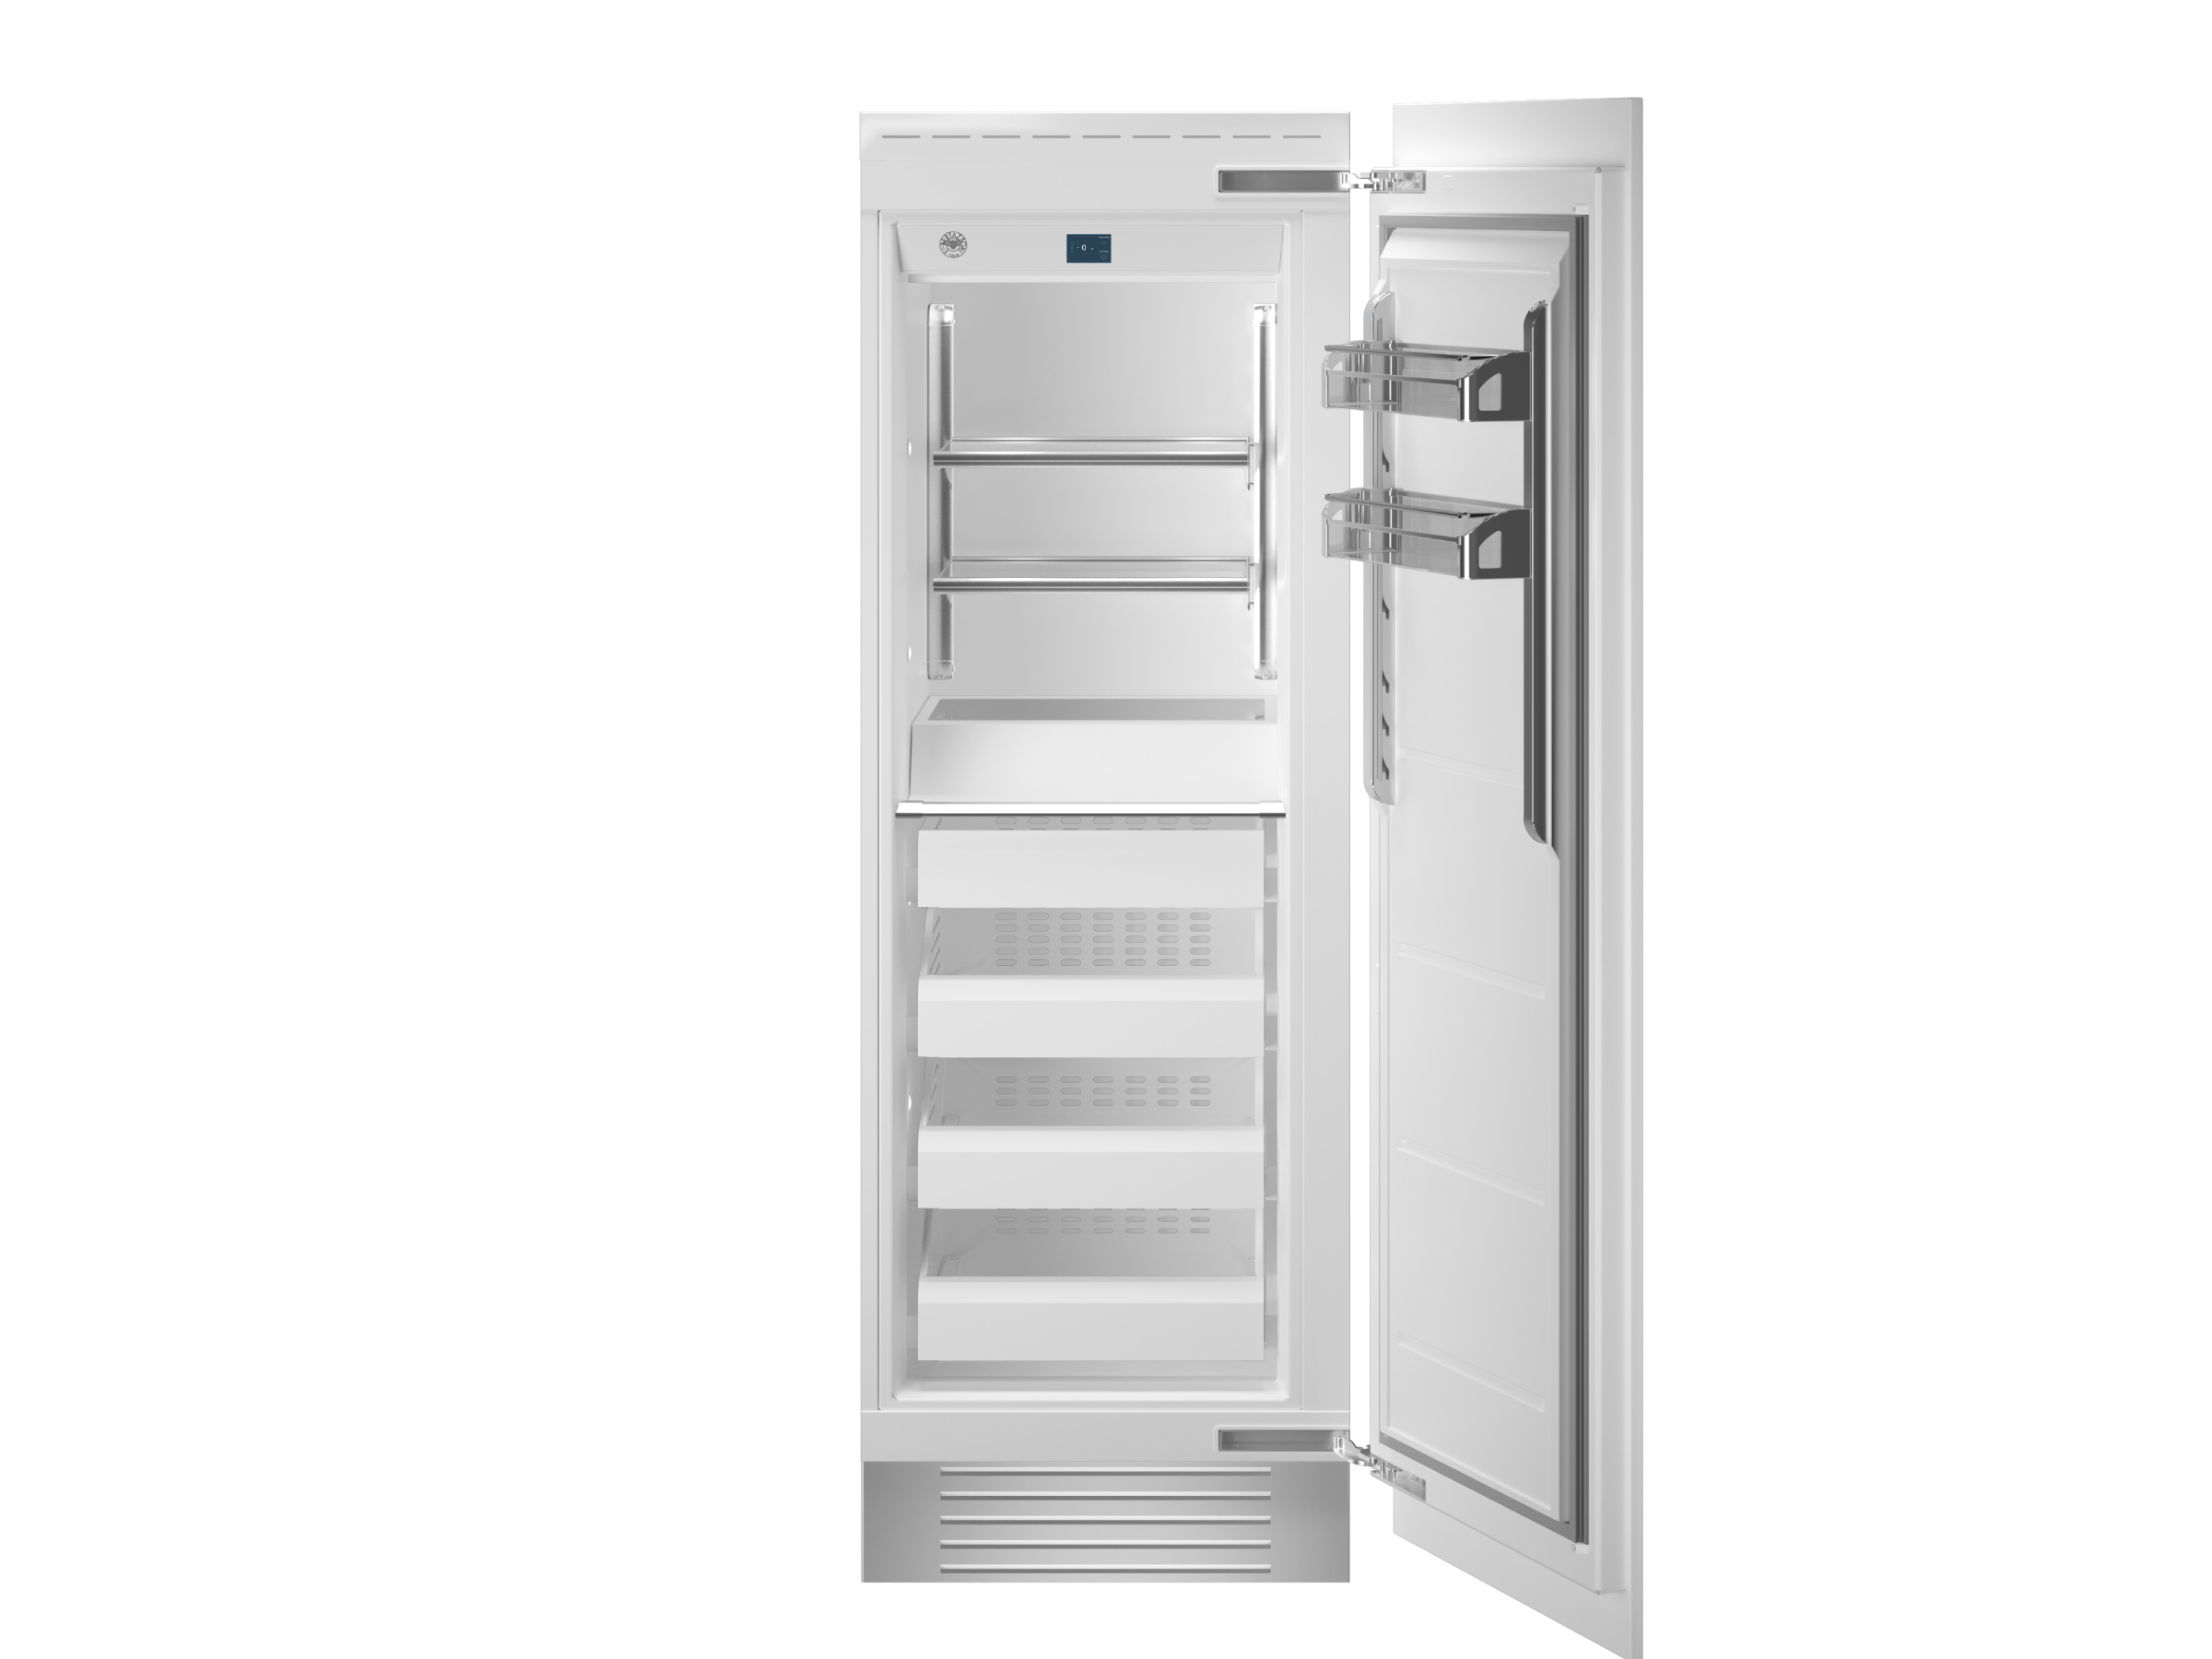 30 Integrated Column Refrigerator, Built-In & Panel Ready